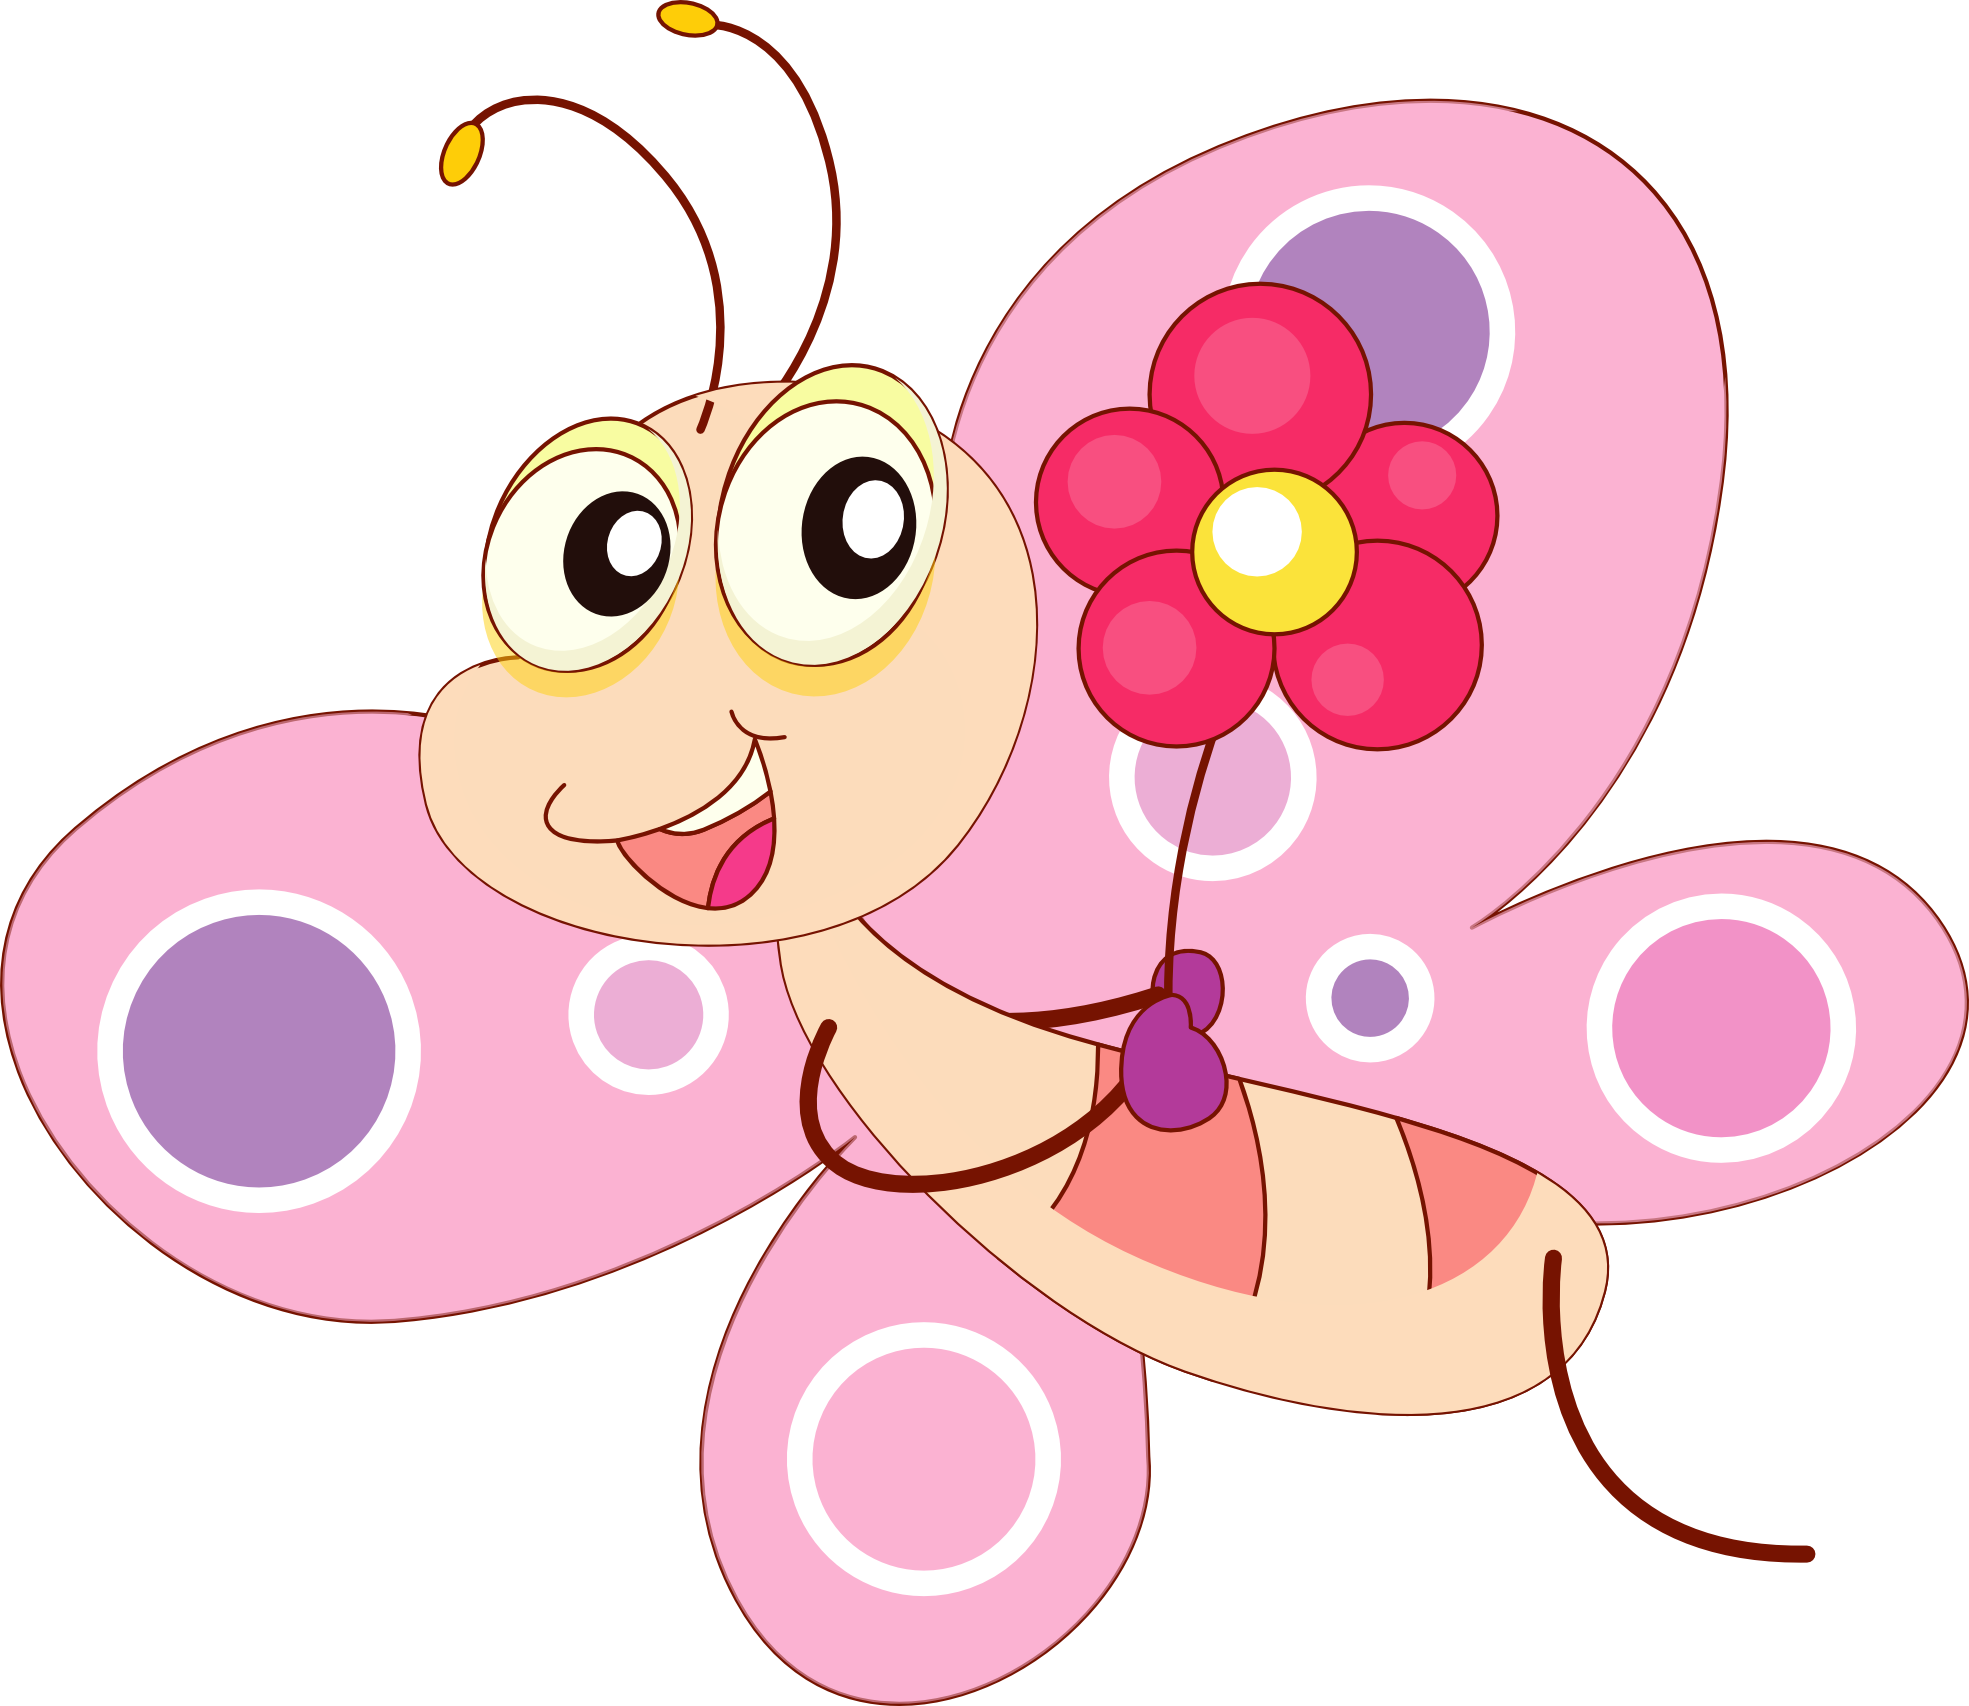 Butterfly Cartoon PNG Transparent Background, Free Download